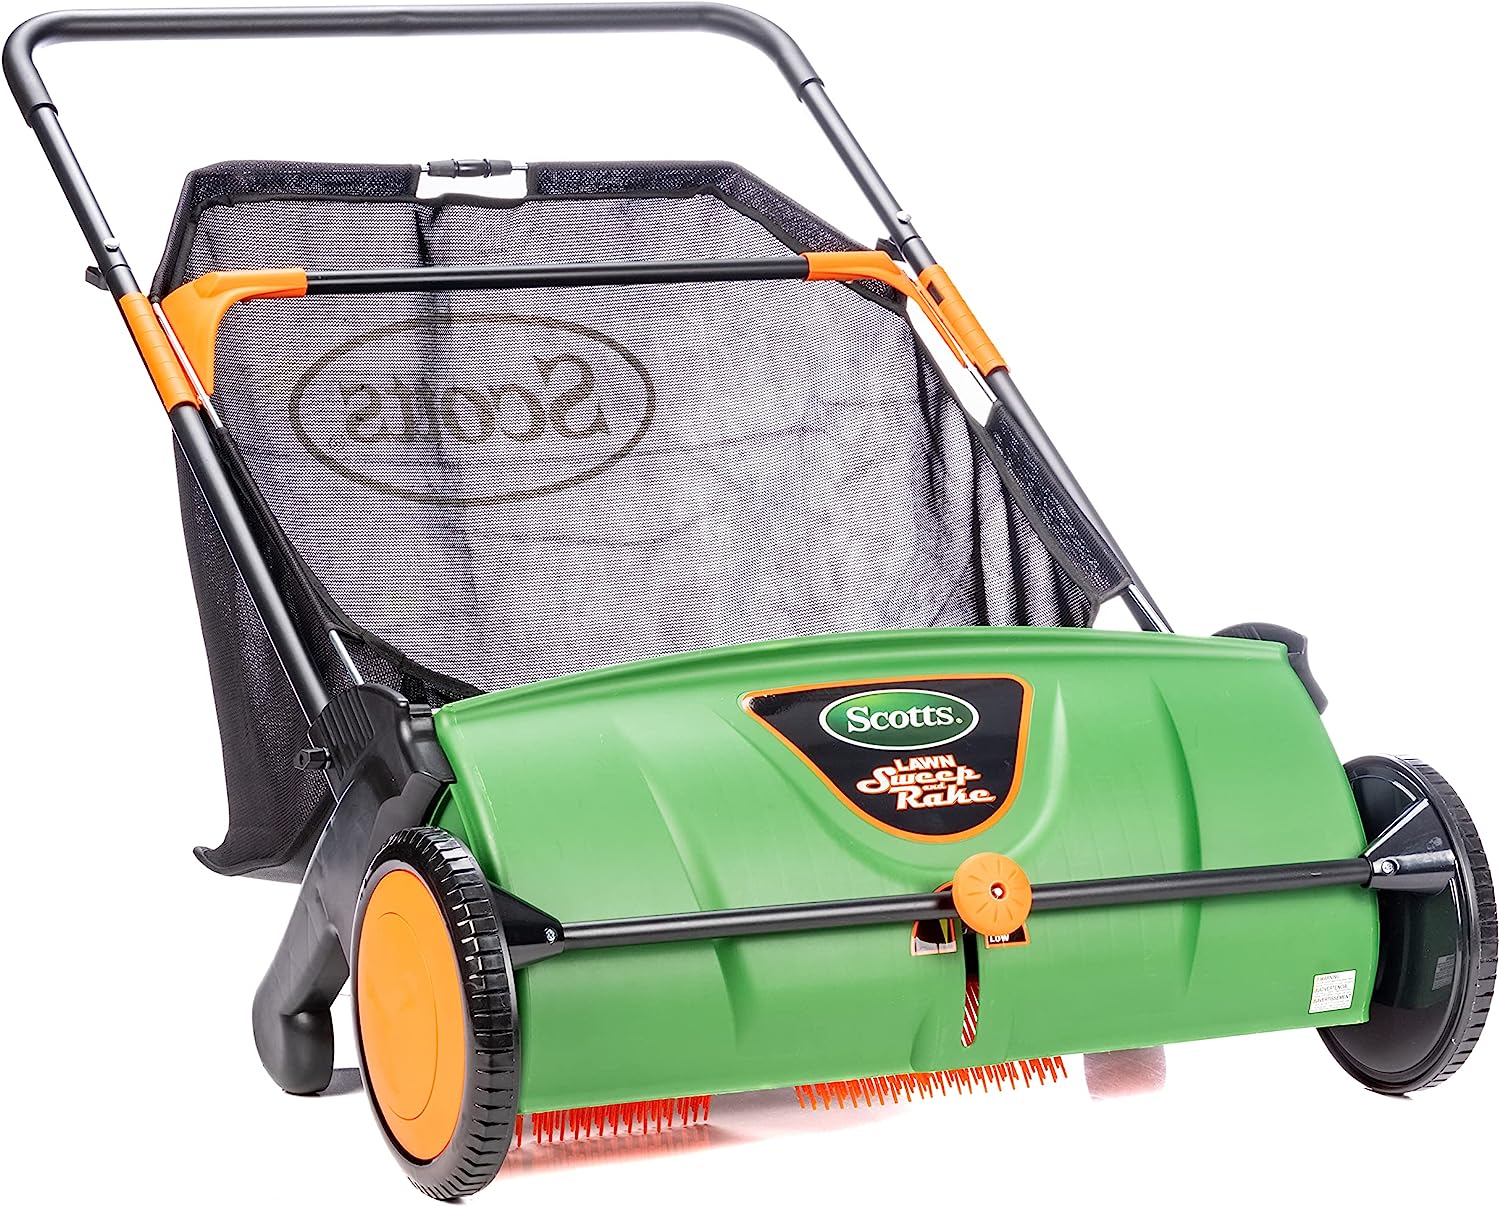 Scotts Outdoor Power Tools LSW70026S 26-Inch Push Lawn [...]